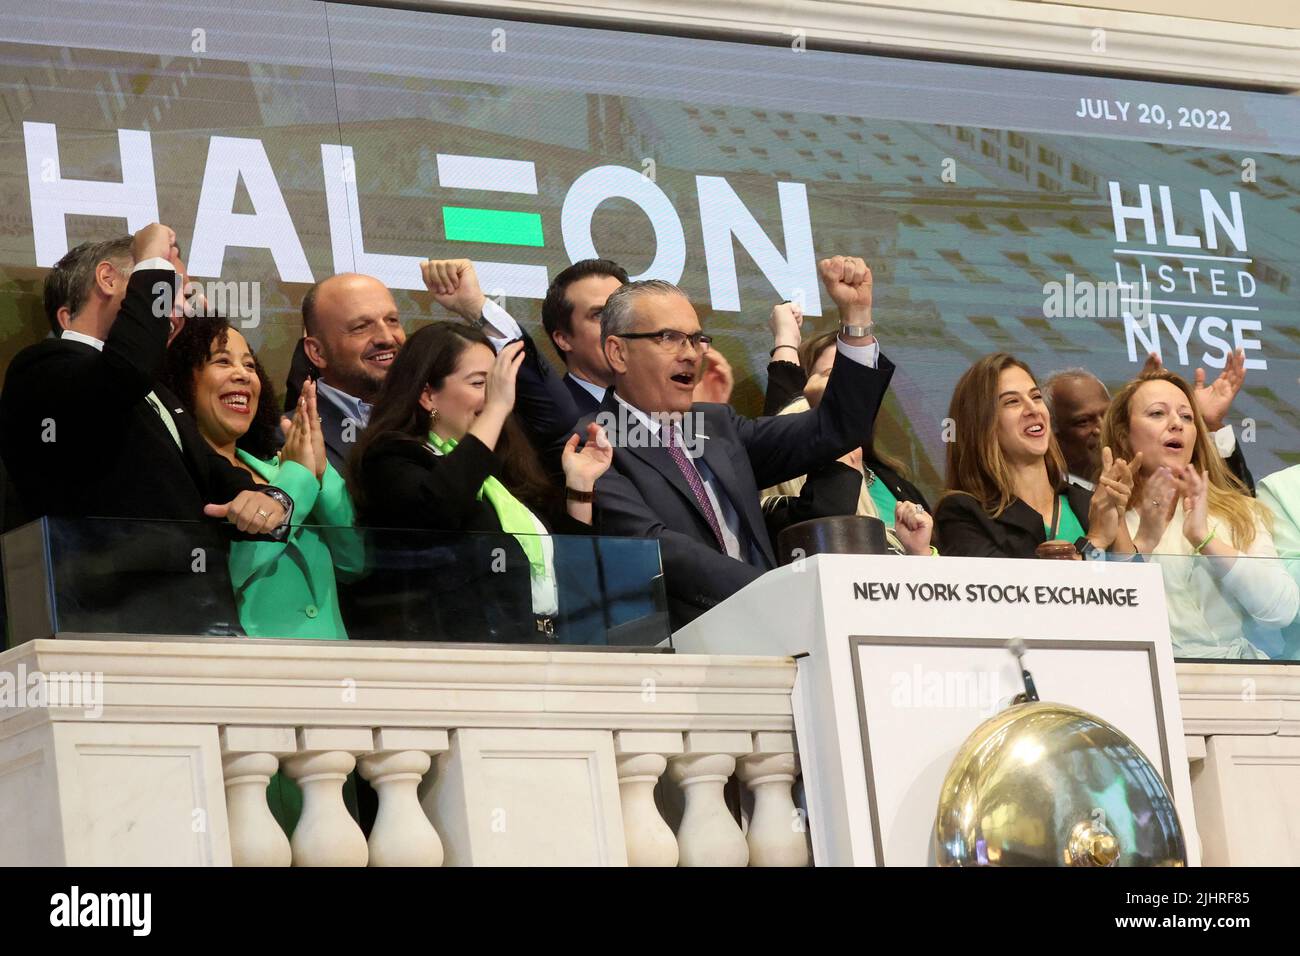 Brian McNamara, CEO of Haleon, rings the opening bell to celebrate his company’s listing on the New York Stock Exchange (NYSE) in New York City, U.S., July 20, 2022.  REUTERS/Brendan McDermid Stock Photo